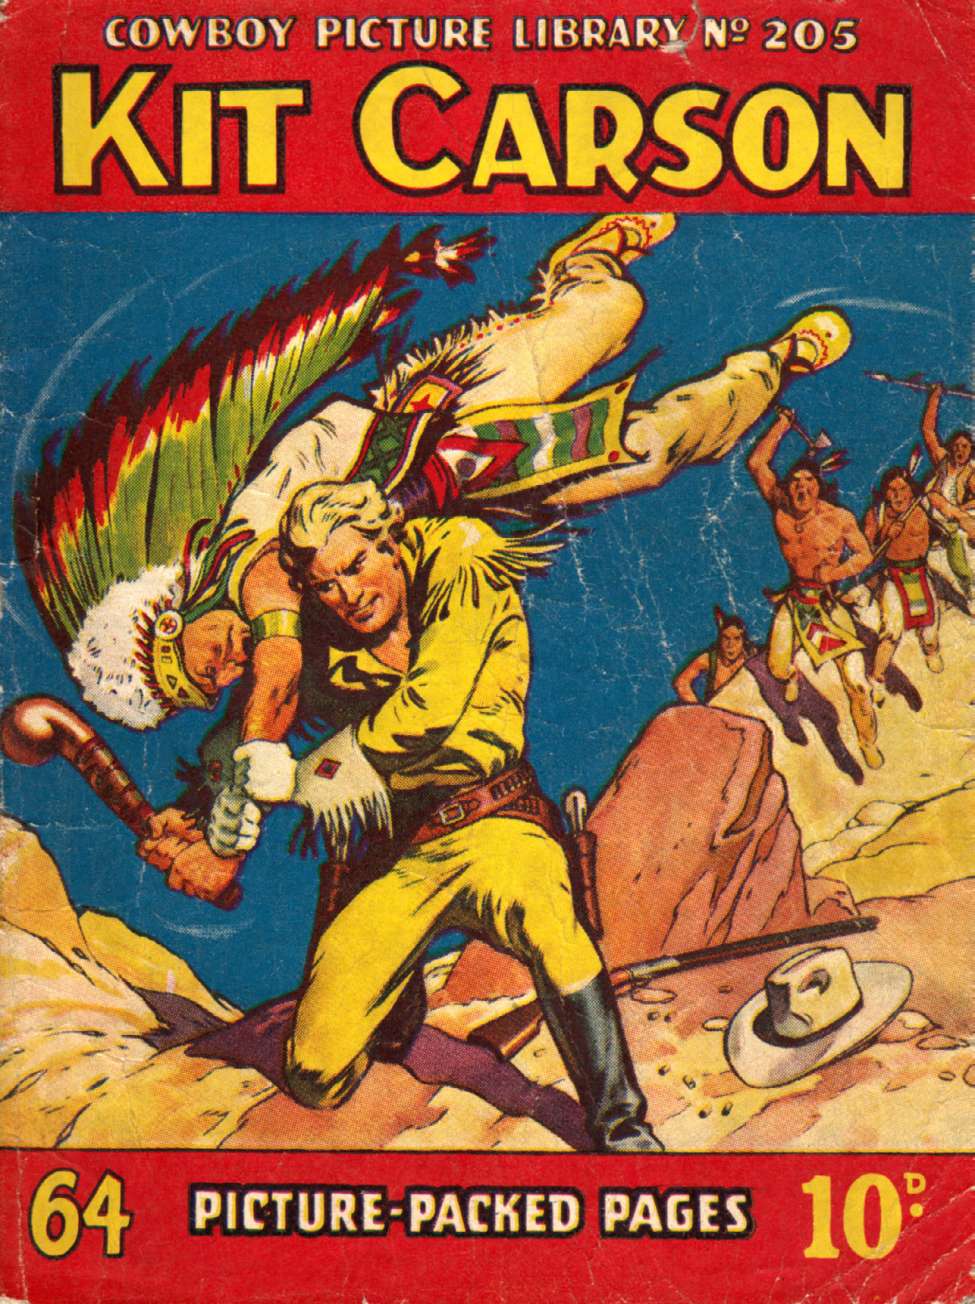 Book Cover For Cowboy Picture Library 205